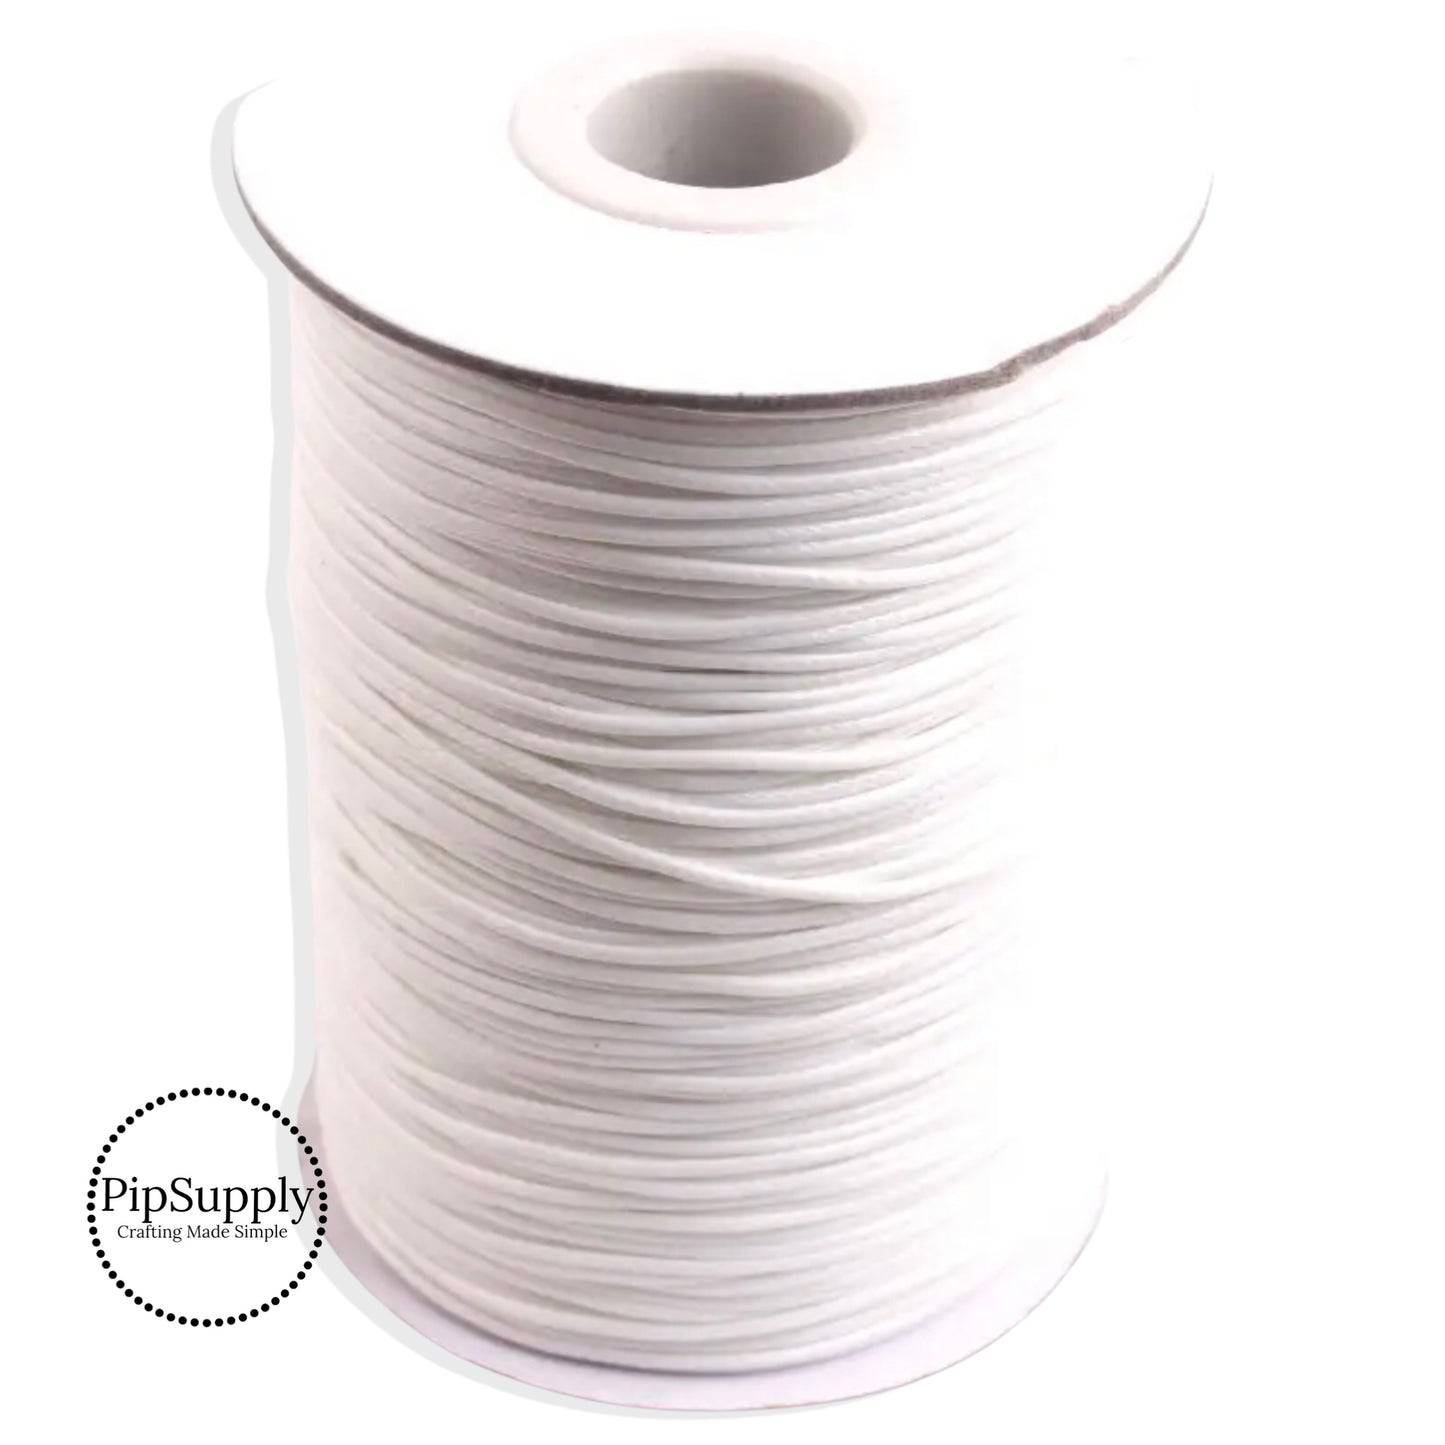 White nylon cord used for making jewelry and other DIY crafts.